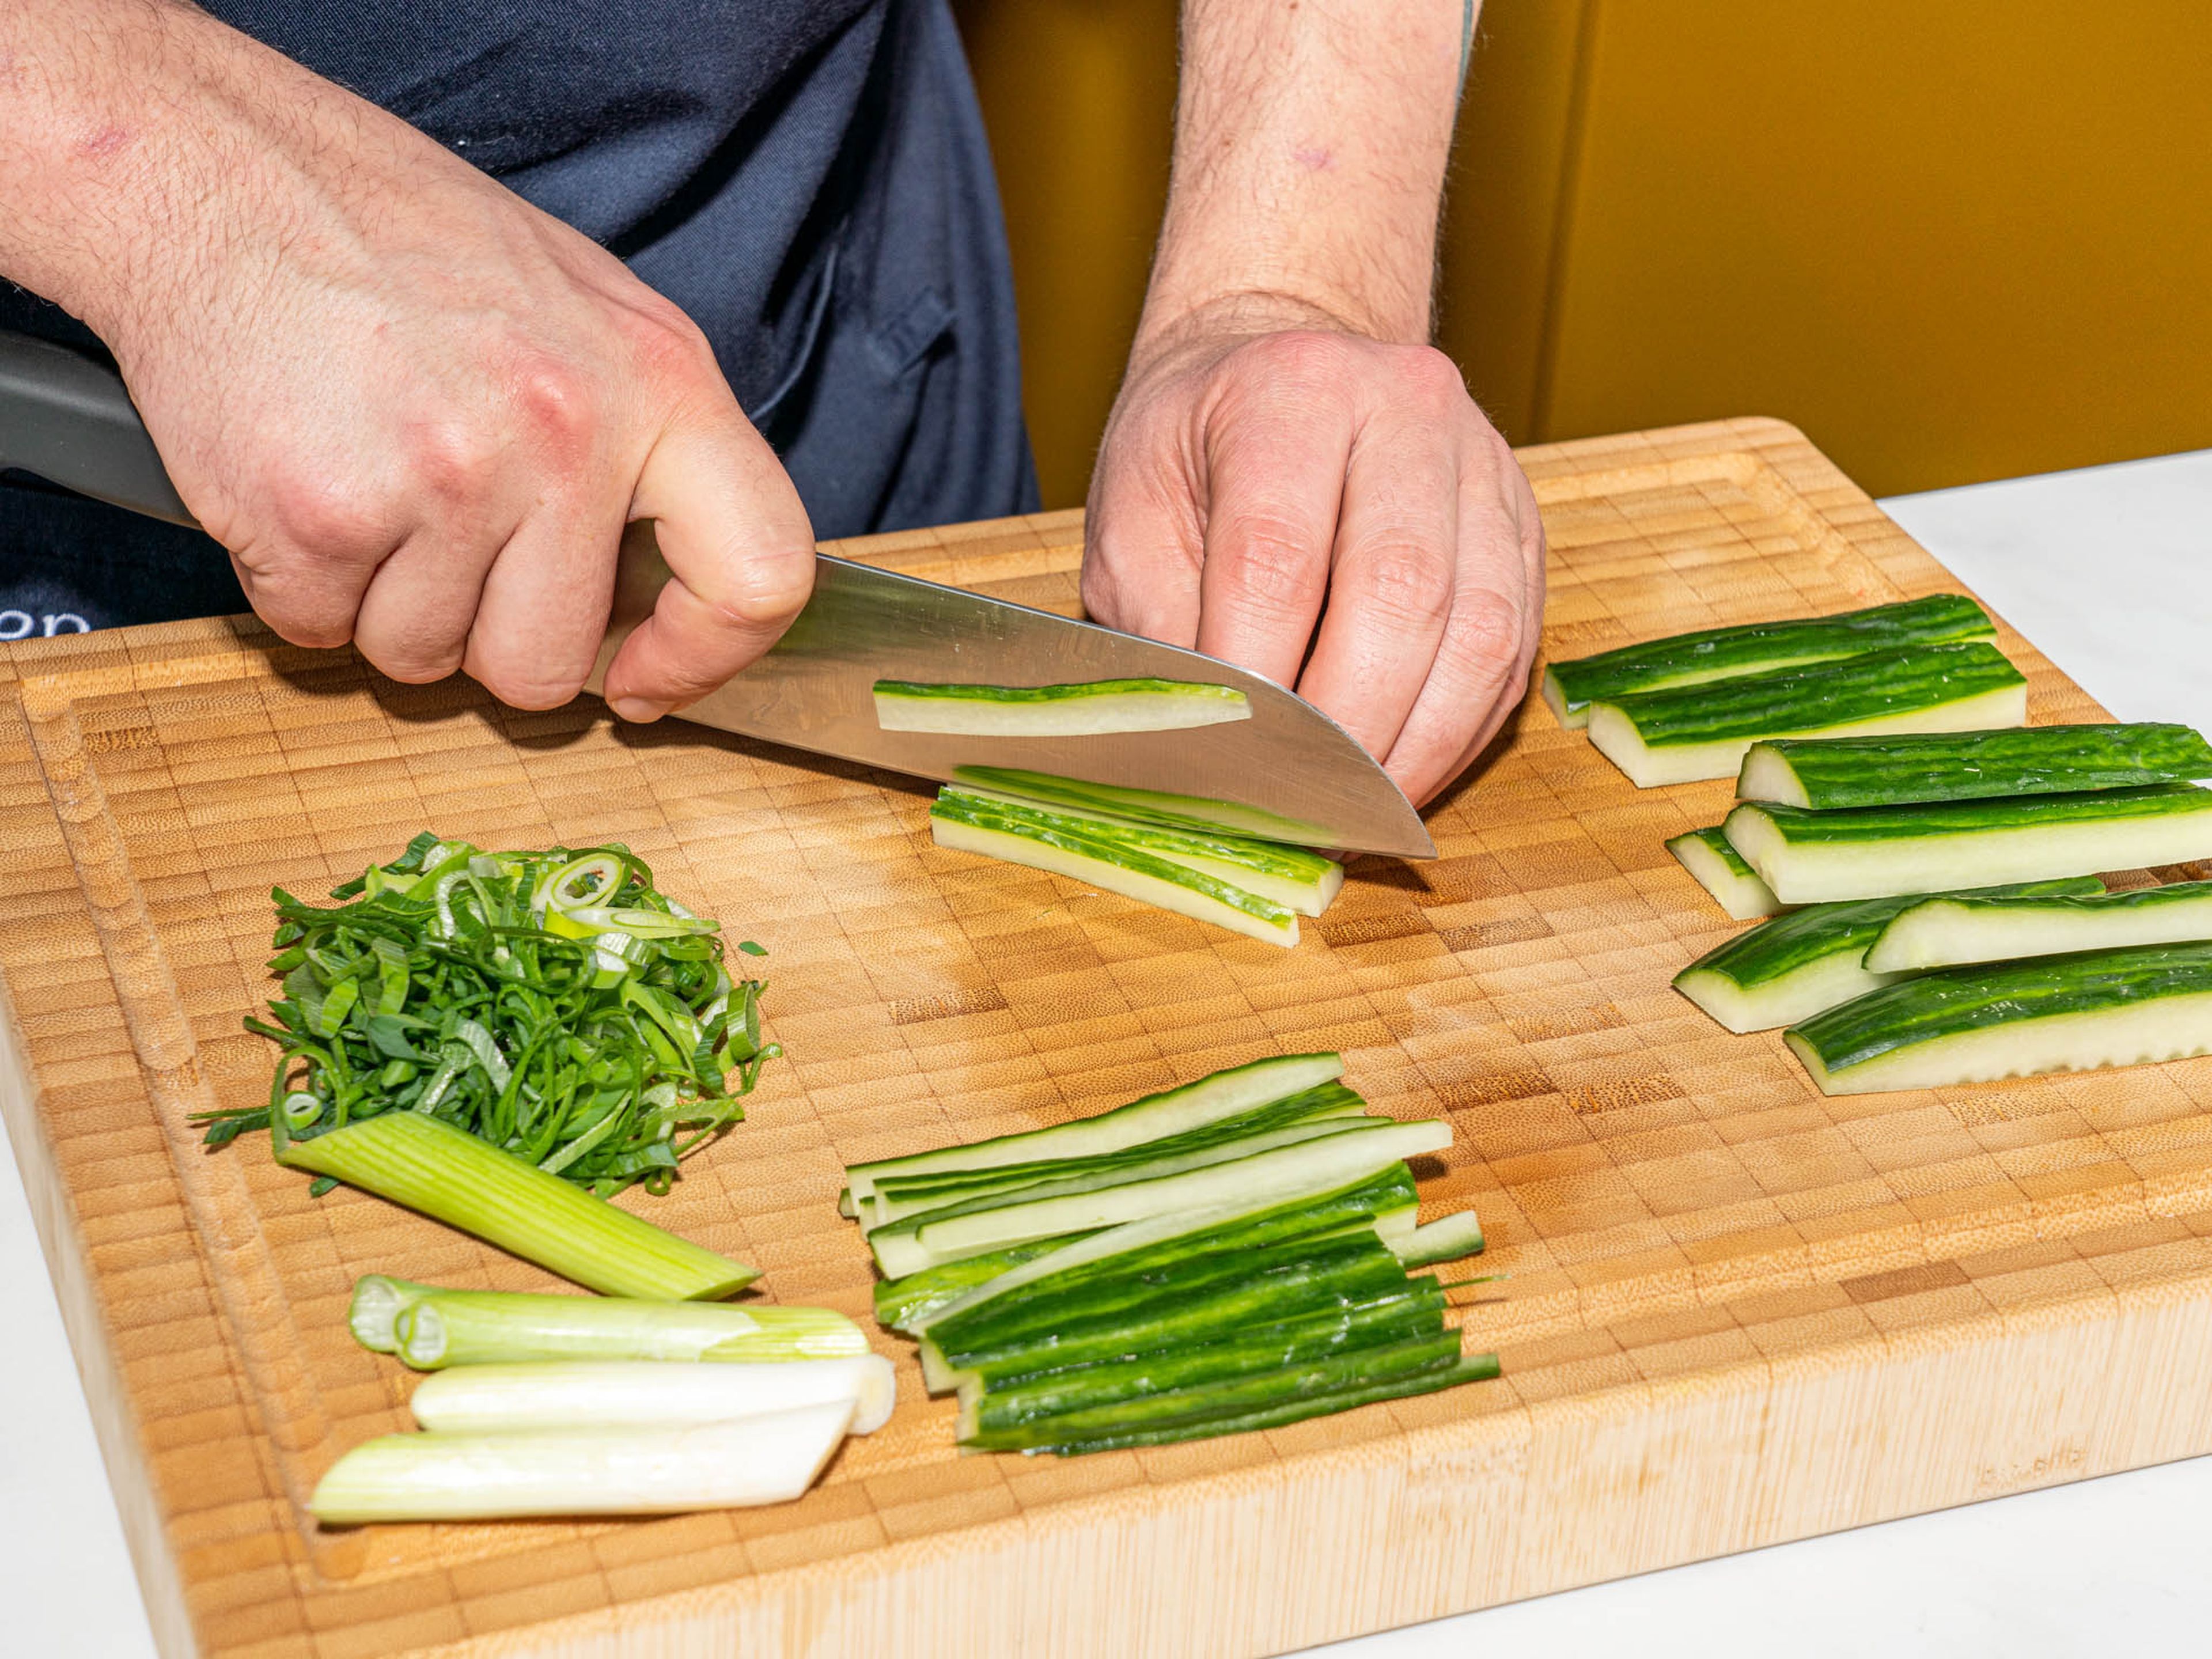 Separate scallion whites and greens. Cut white parts into thin strips, approx. 5 cm/2in in length and slice the green parts into rings on the diagonal. Finely julienne cucumber. Roughly chop ginger.